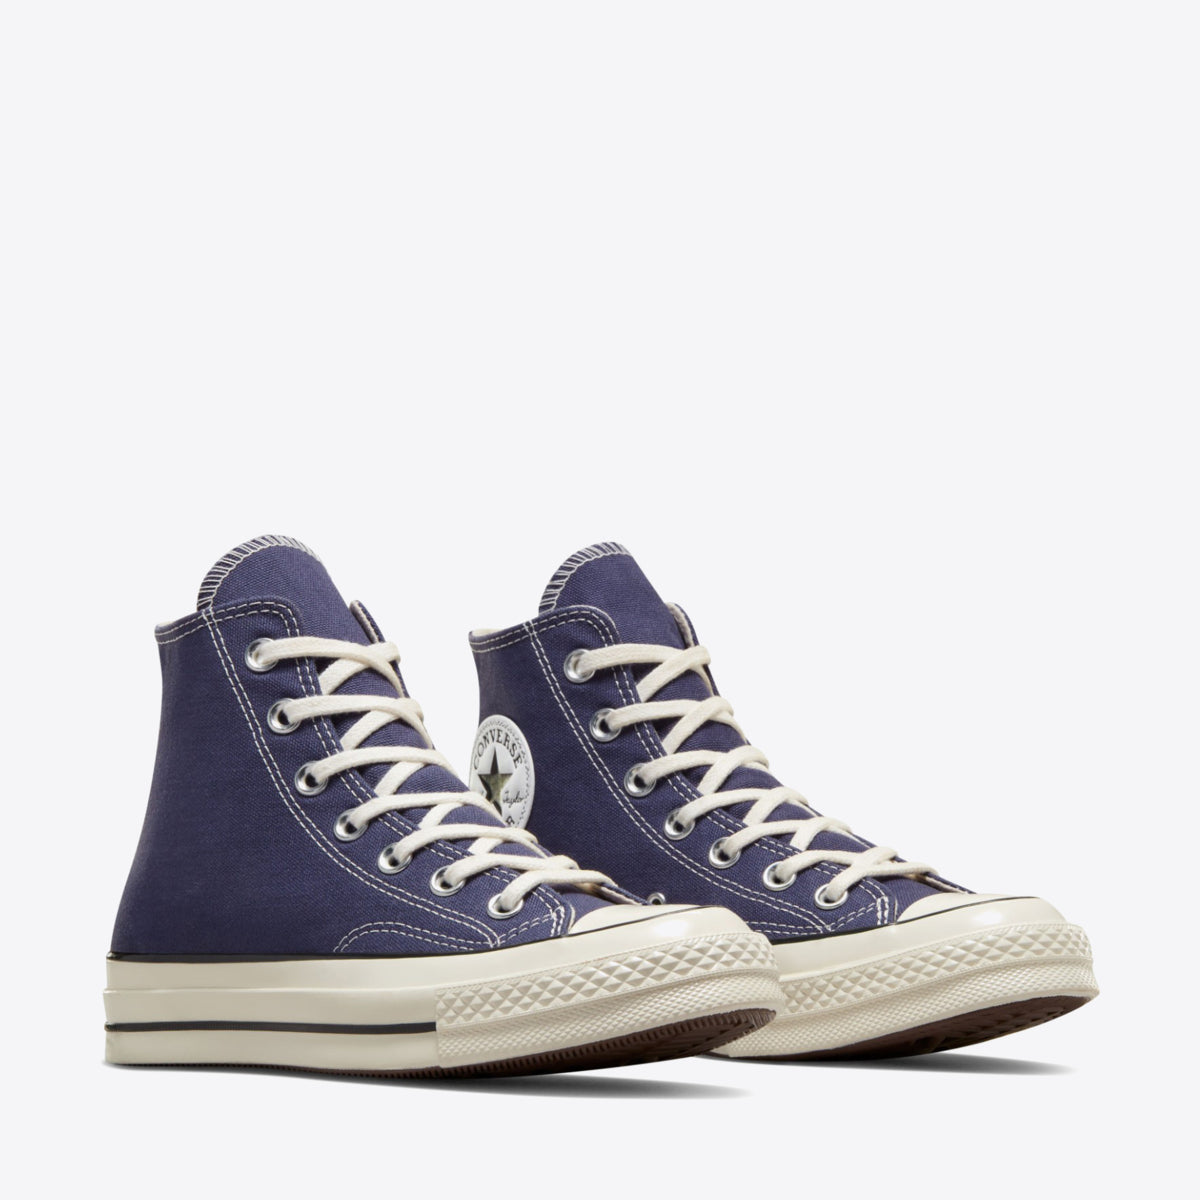 CONVERSE Chuck Taylor 70 Seasonal High Uncharted Waters/Egret - Image 5